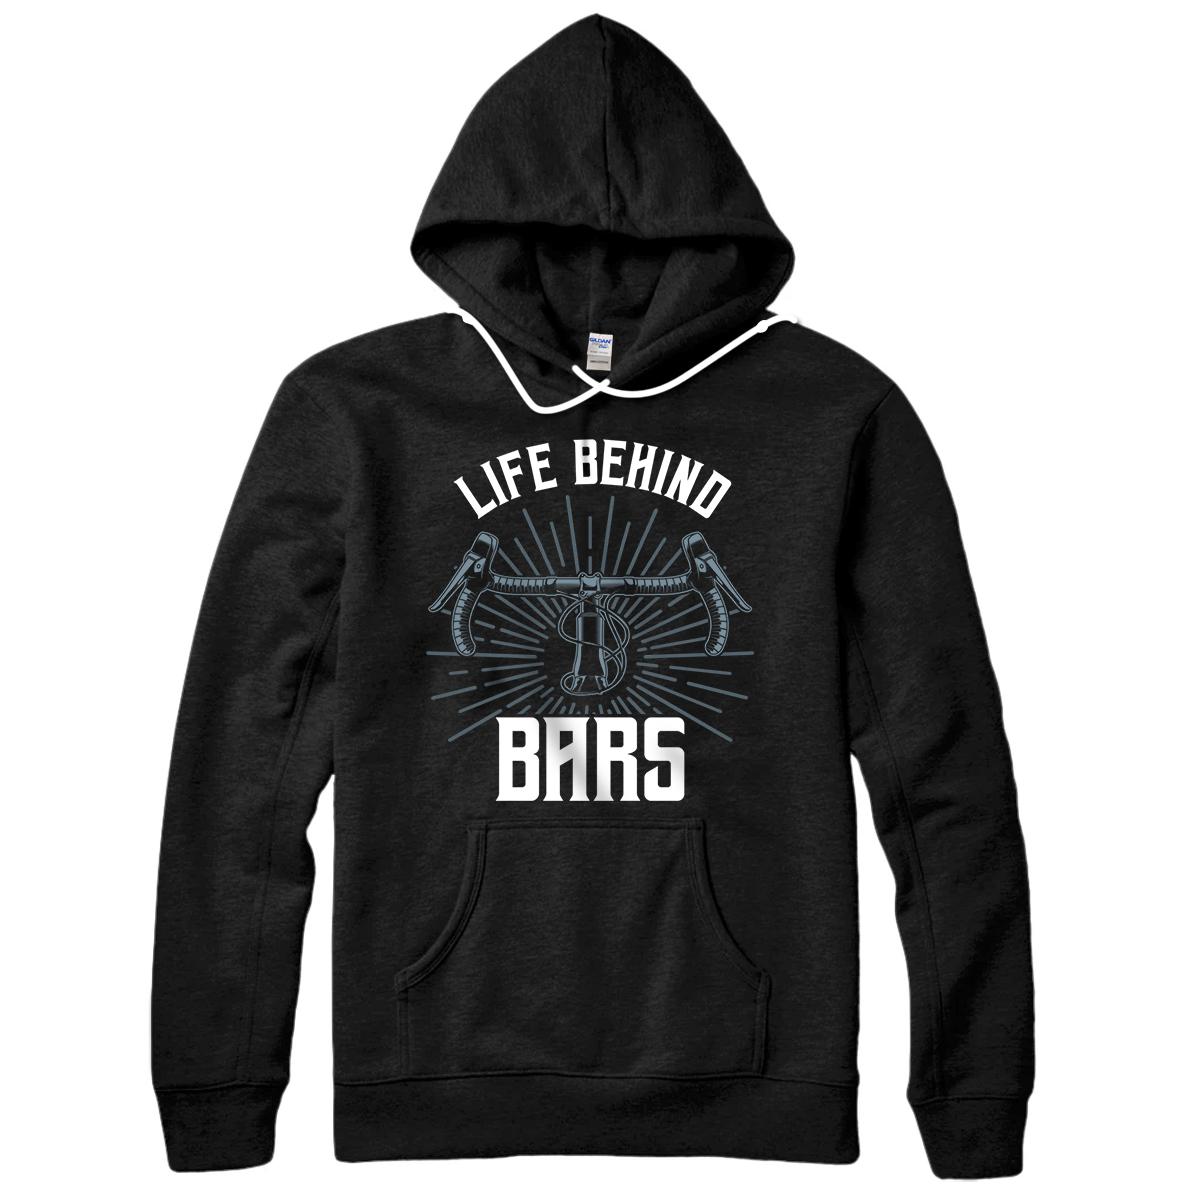 Personalized Funny Road Cycling Gift Bike For Men Women Life Behind Bars Pullover Hoodie